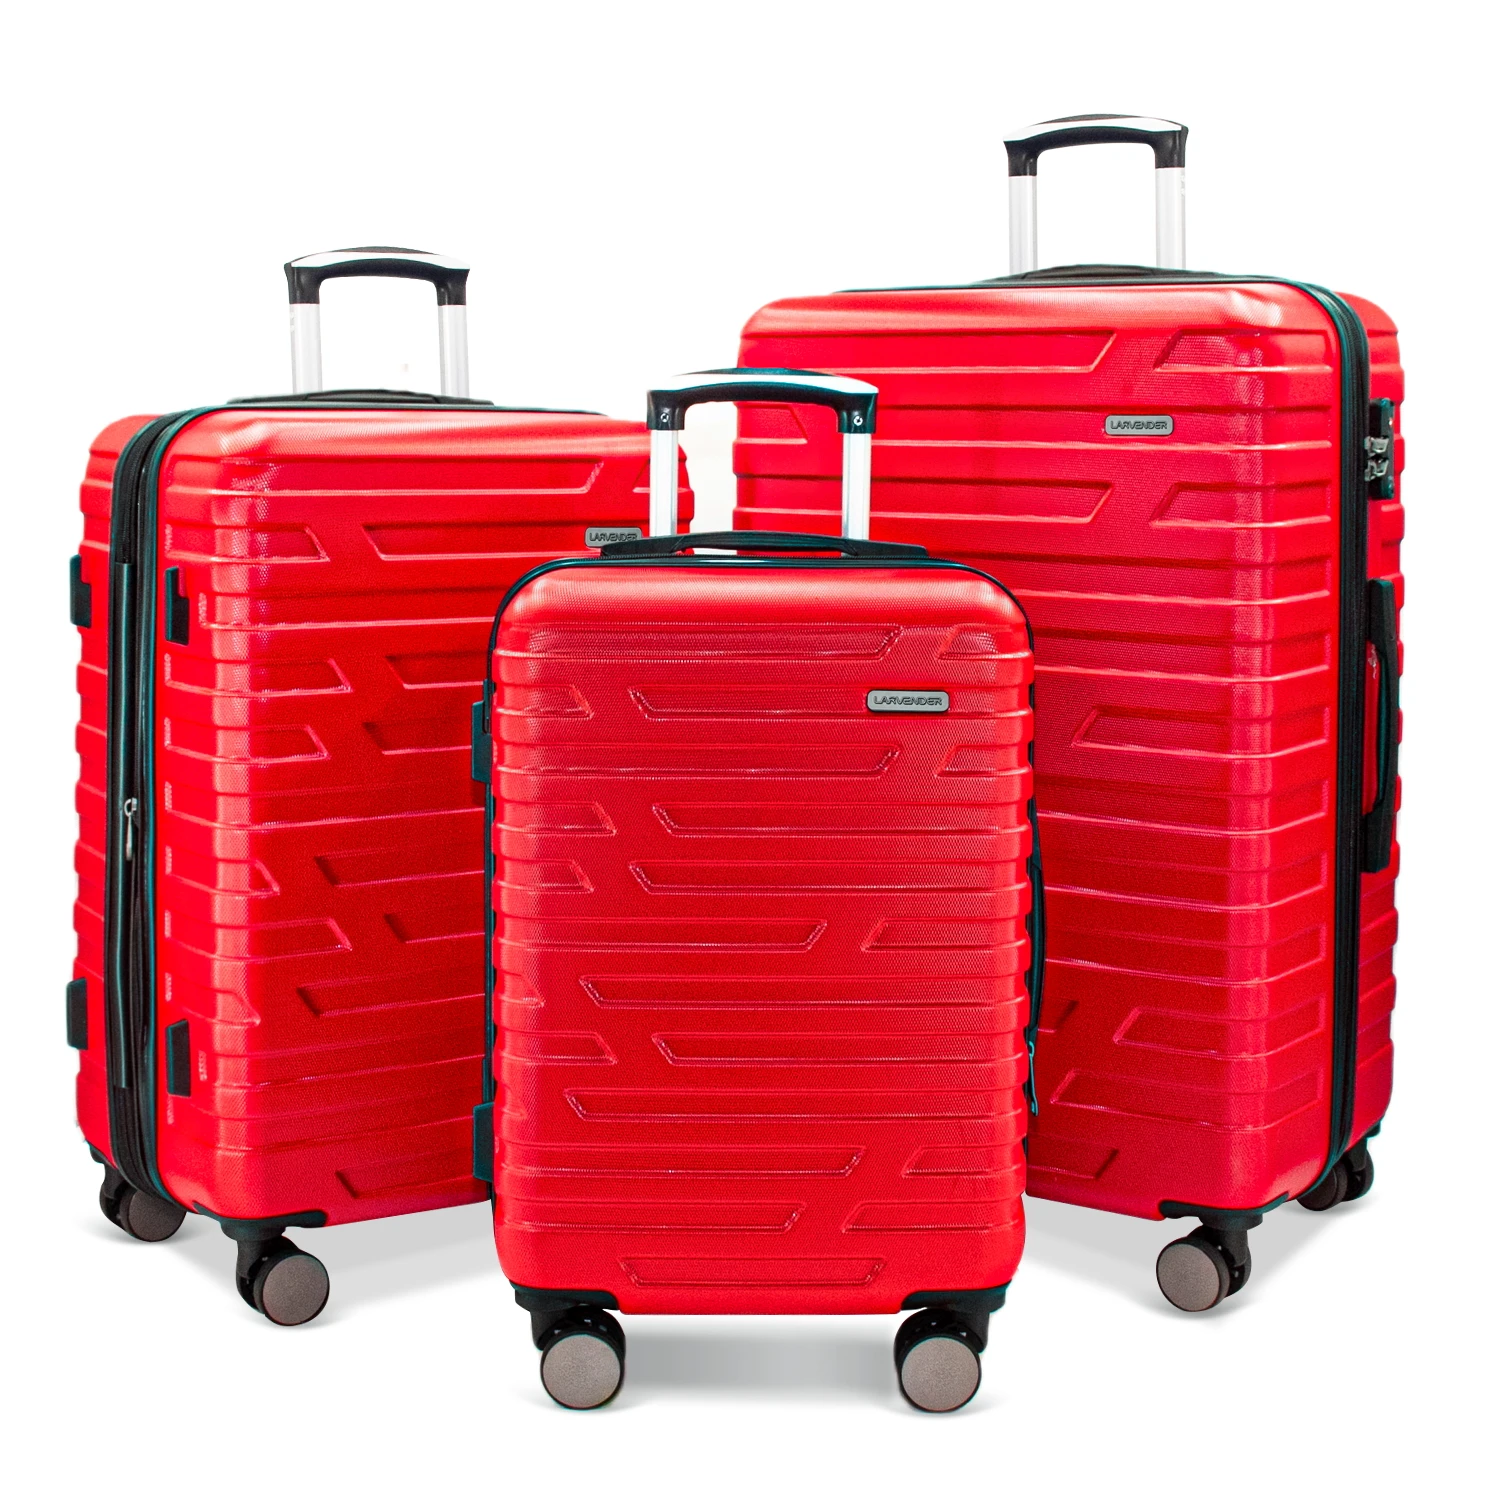 

Custom carry on 3 pcs luggage set travel bags spinner wheels trolley bag suitcase with digital lock, Red or customized color